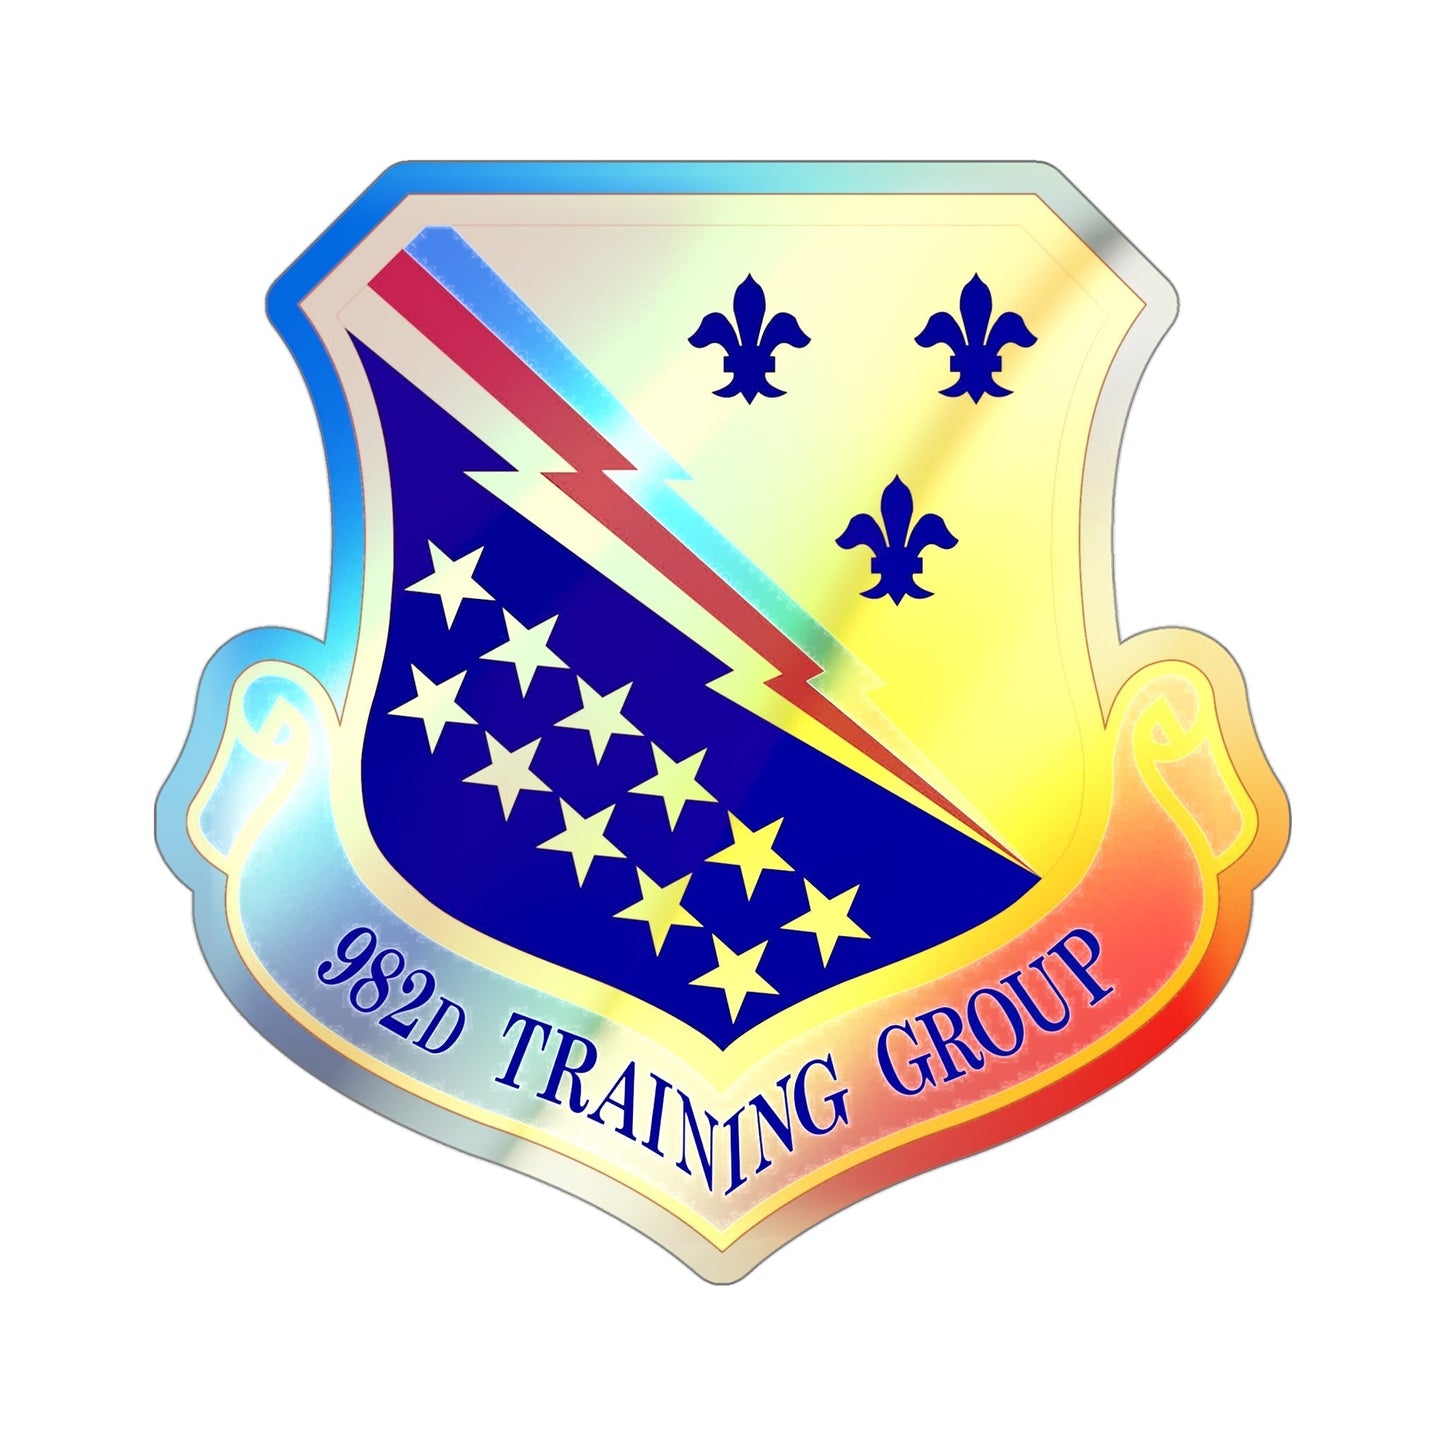 982d Training Group (U.S. Air Force) Holographic STICKER Die-Cut Vinyl Decal-4 Inch-The Sticker Space